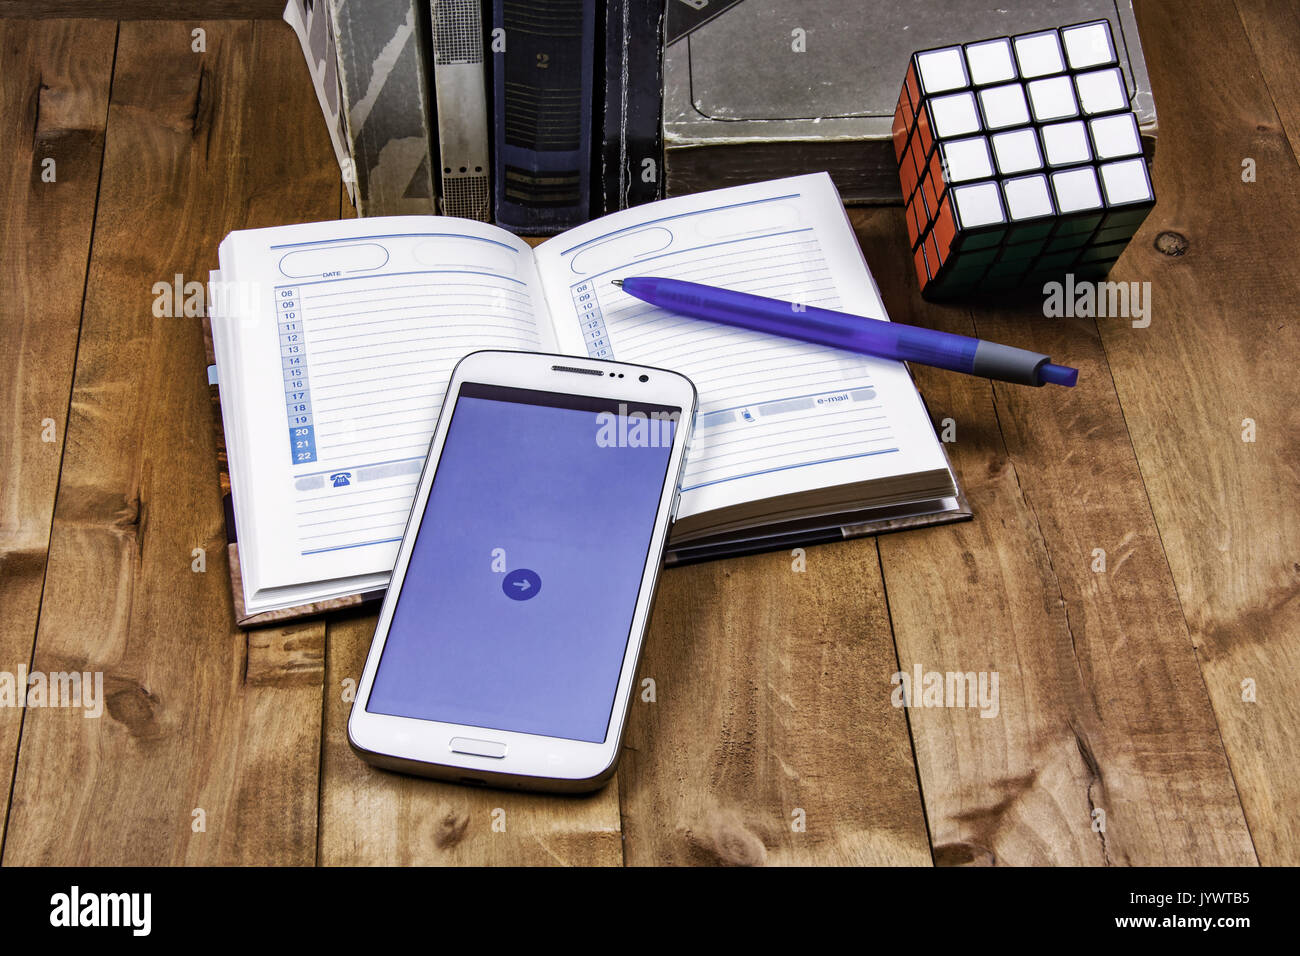 Books, diary with pen, smartphone and cube Rubik lie on a wooden surface Stock Photo